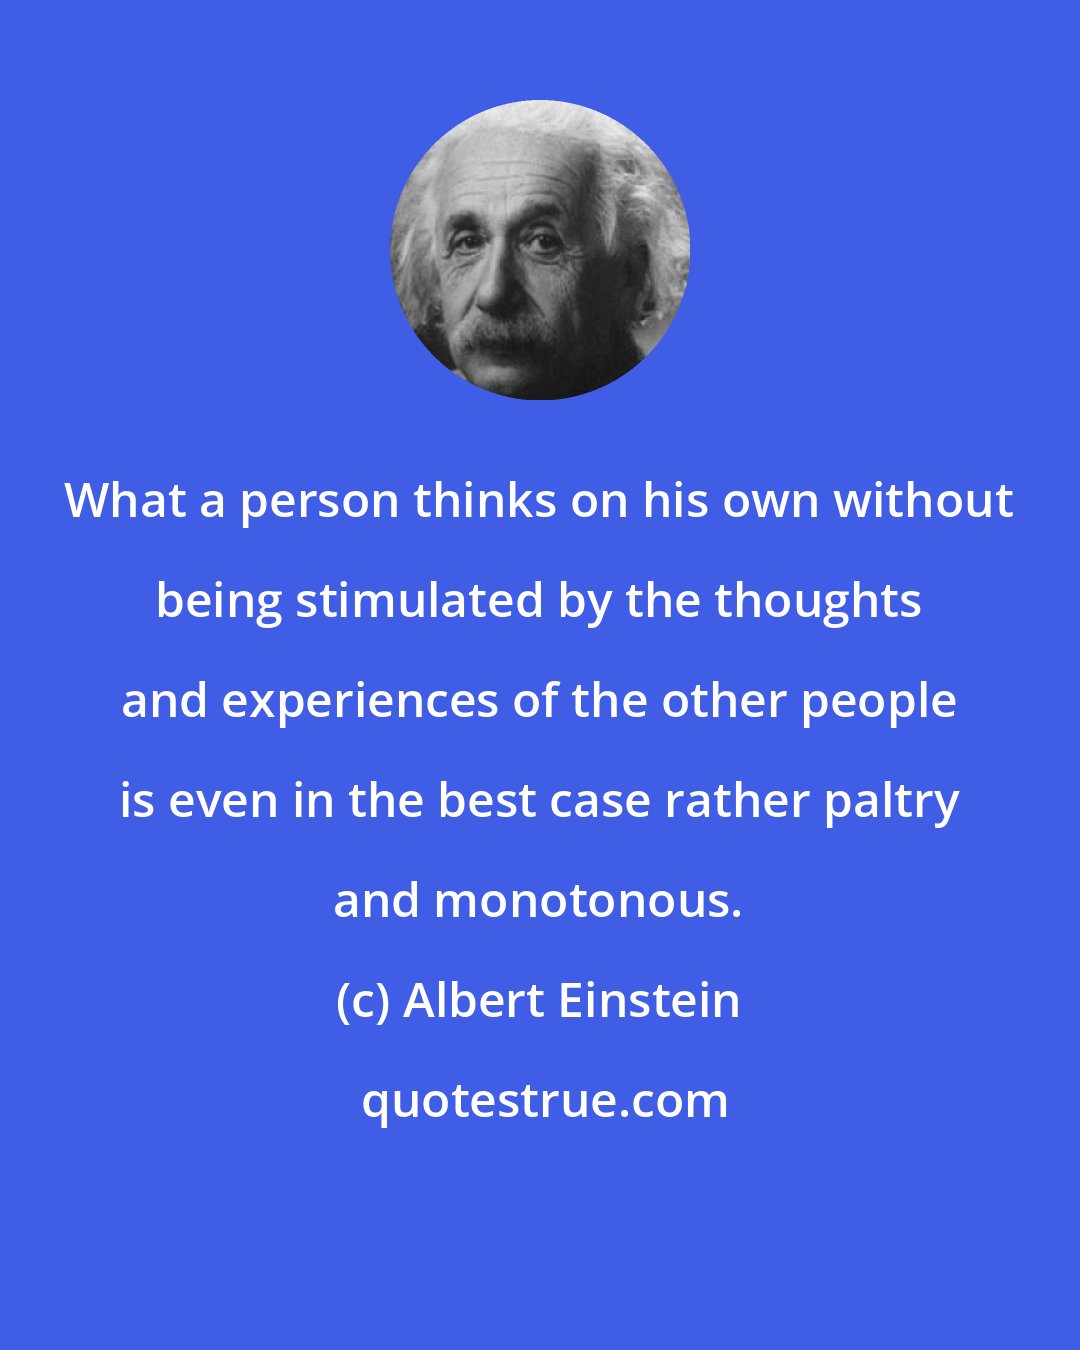 Albert Einstein: What a person thinks on his own without being stimulated by the thoughts and experiences of the other people is even in the best case rather paltry and monotonous.